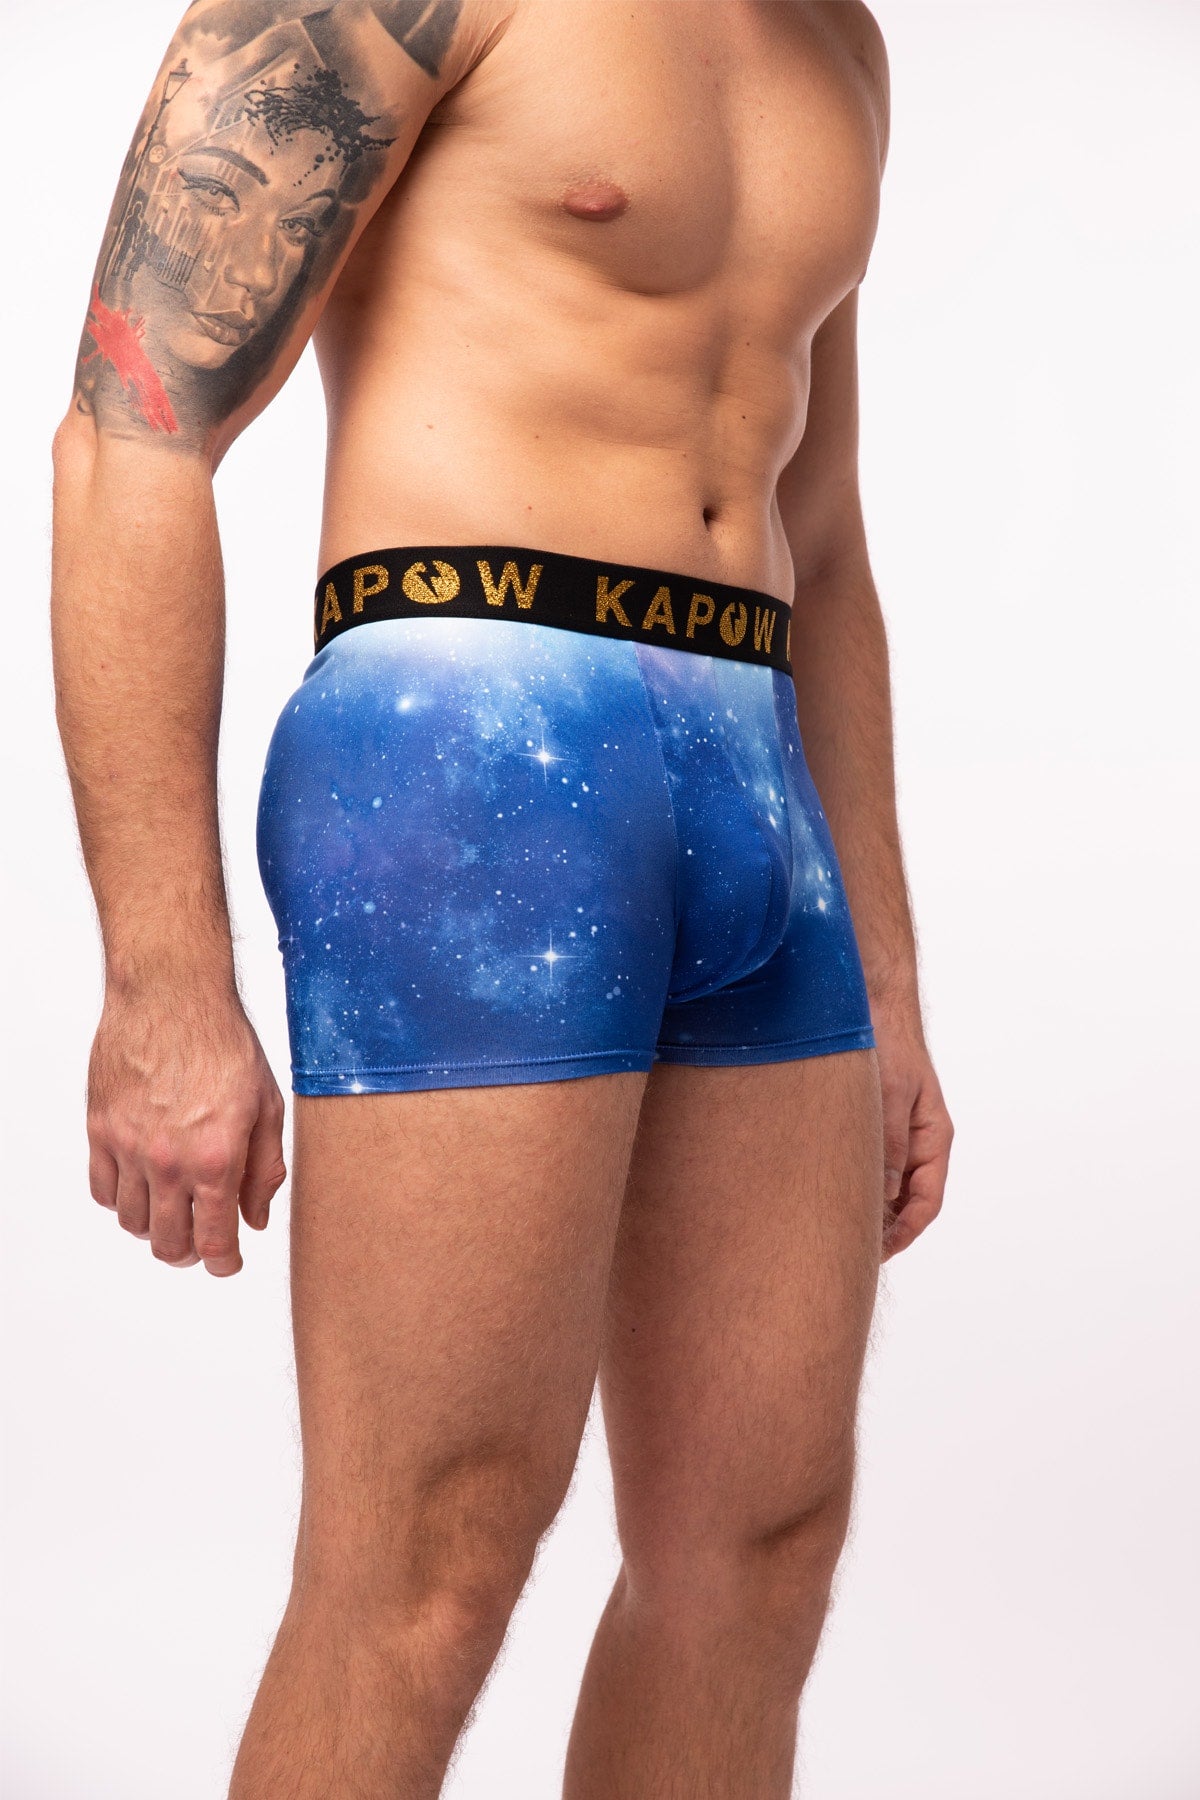 3 PACK Starlord Boxers - Kapow Meggings